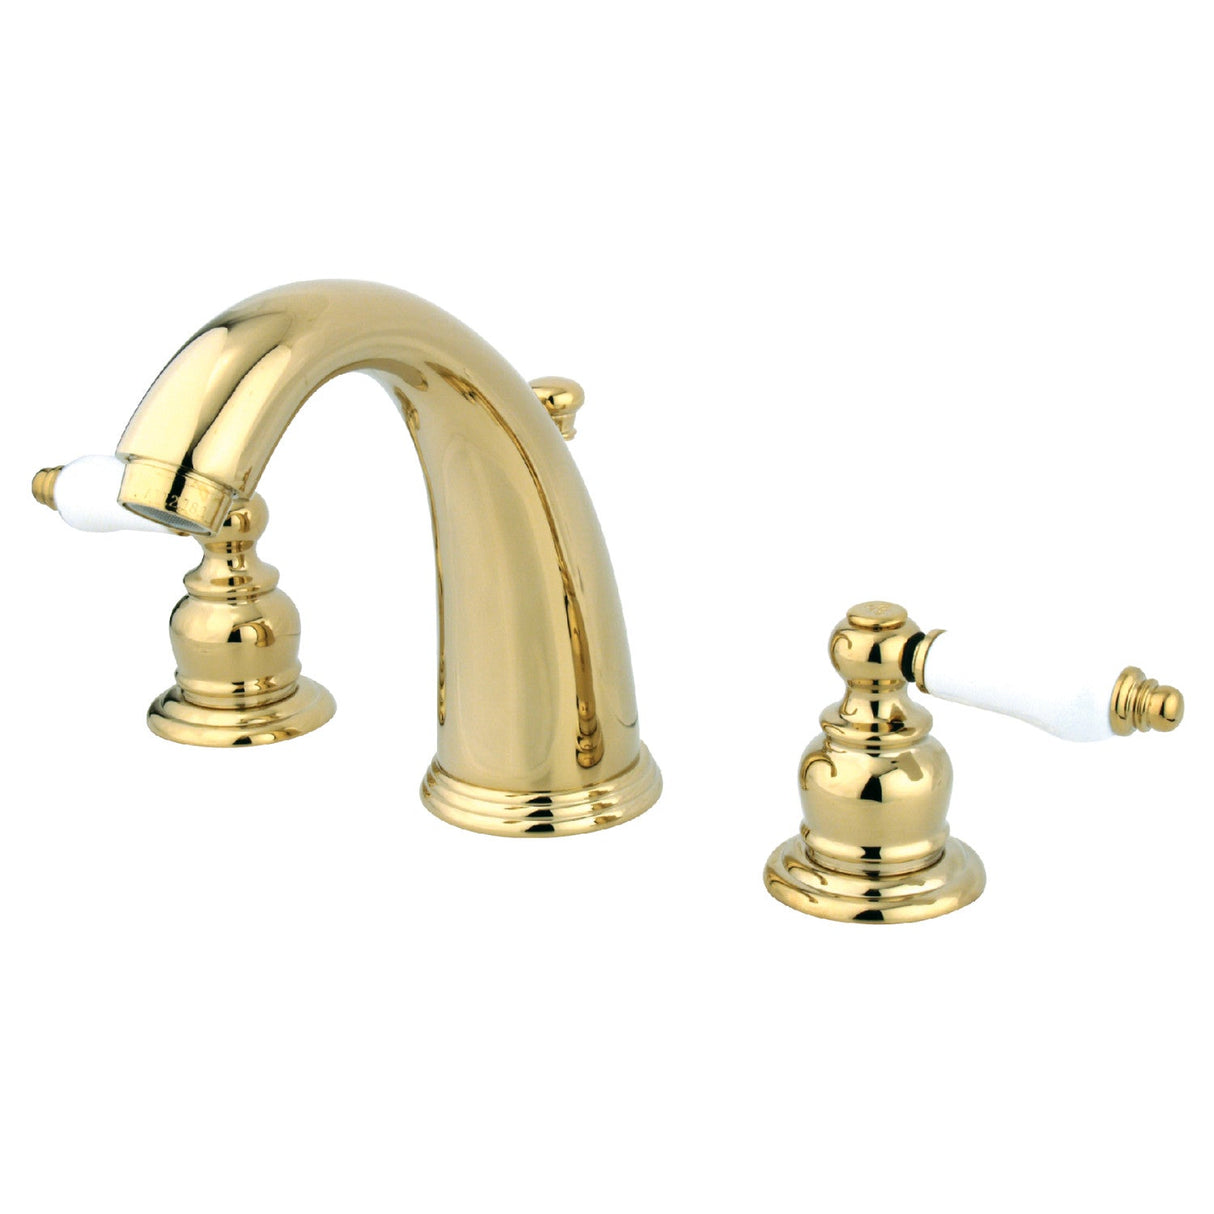 English Country GKB982PL Two-Handle 3-Hole Deck Mount Widespread Bathroom Faucet with Plastic Pop-Up, Polished Brass